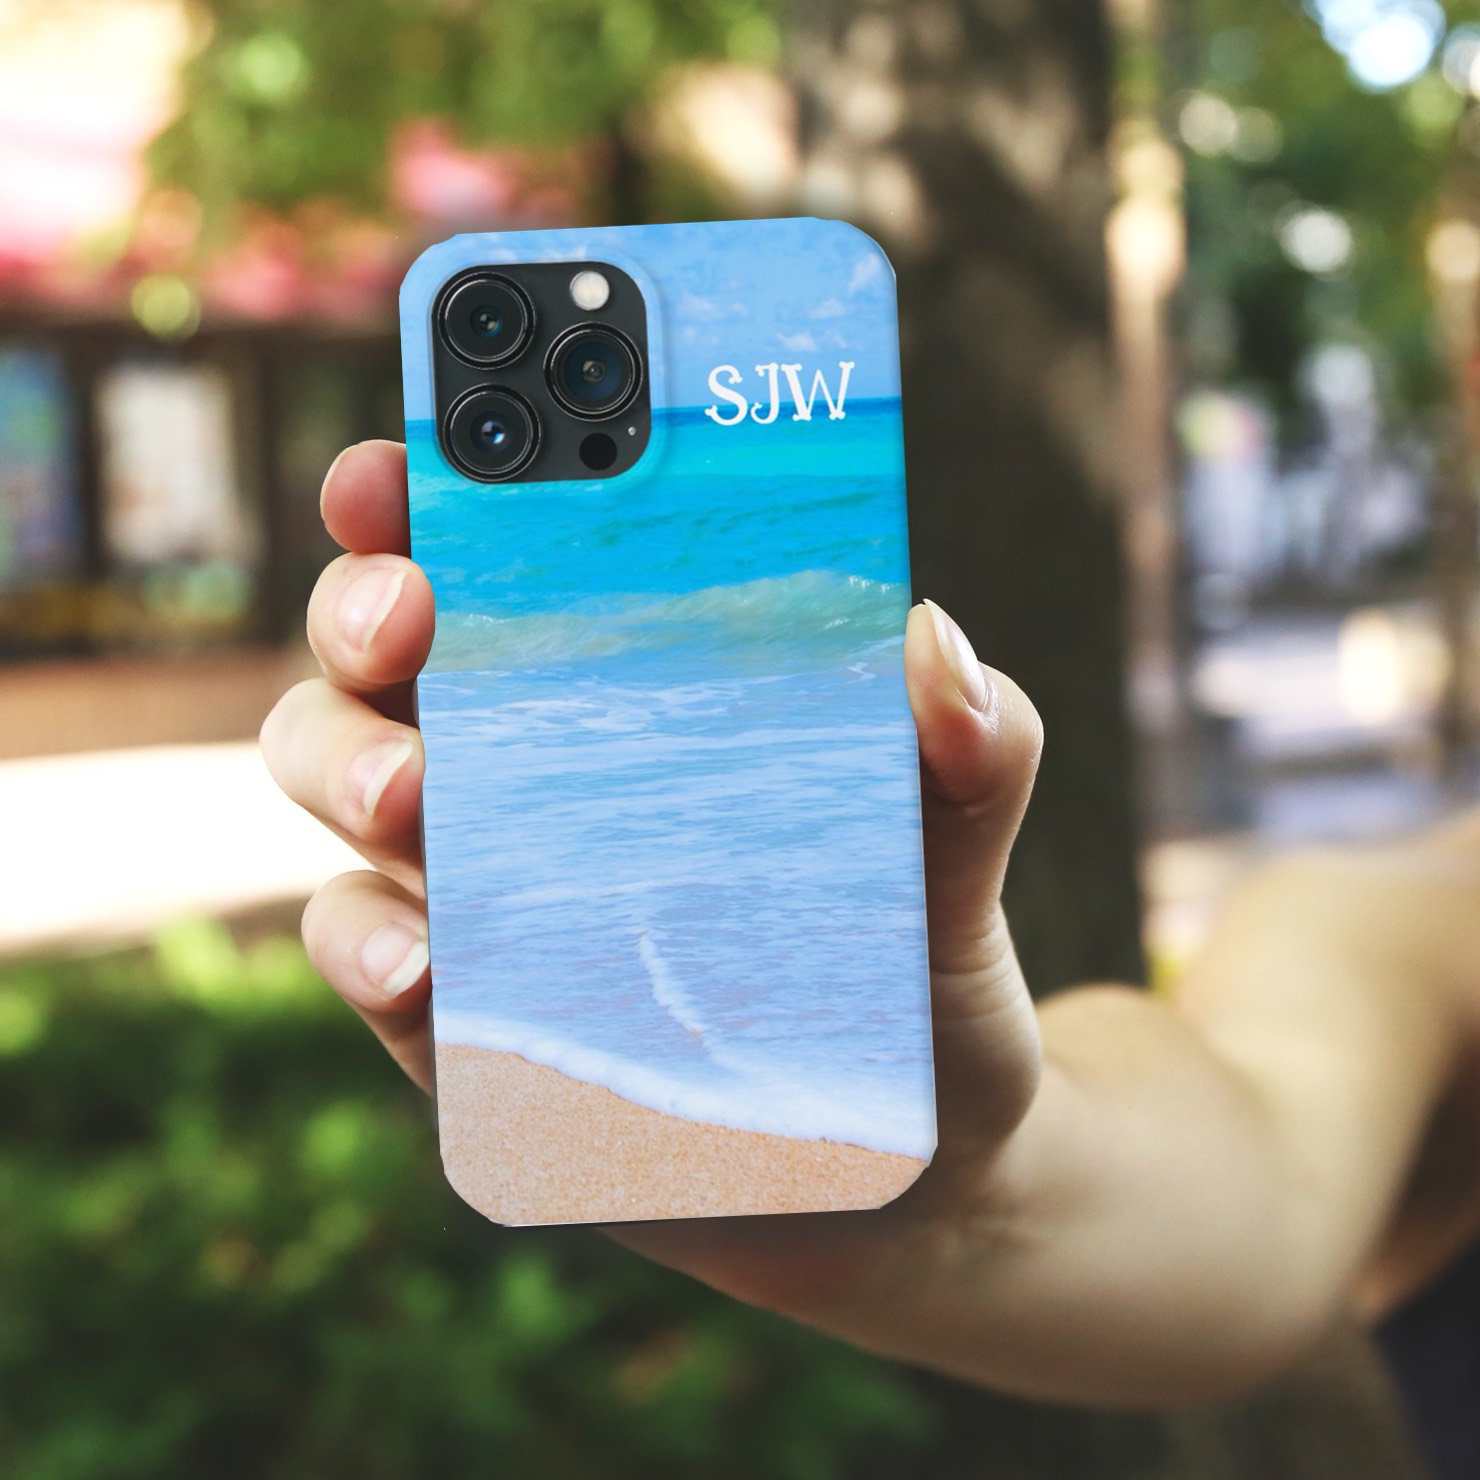 Personalized iPhone case with tropical blue ocean water and monogram initials.